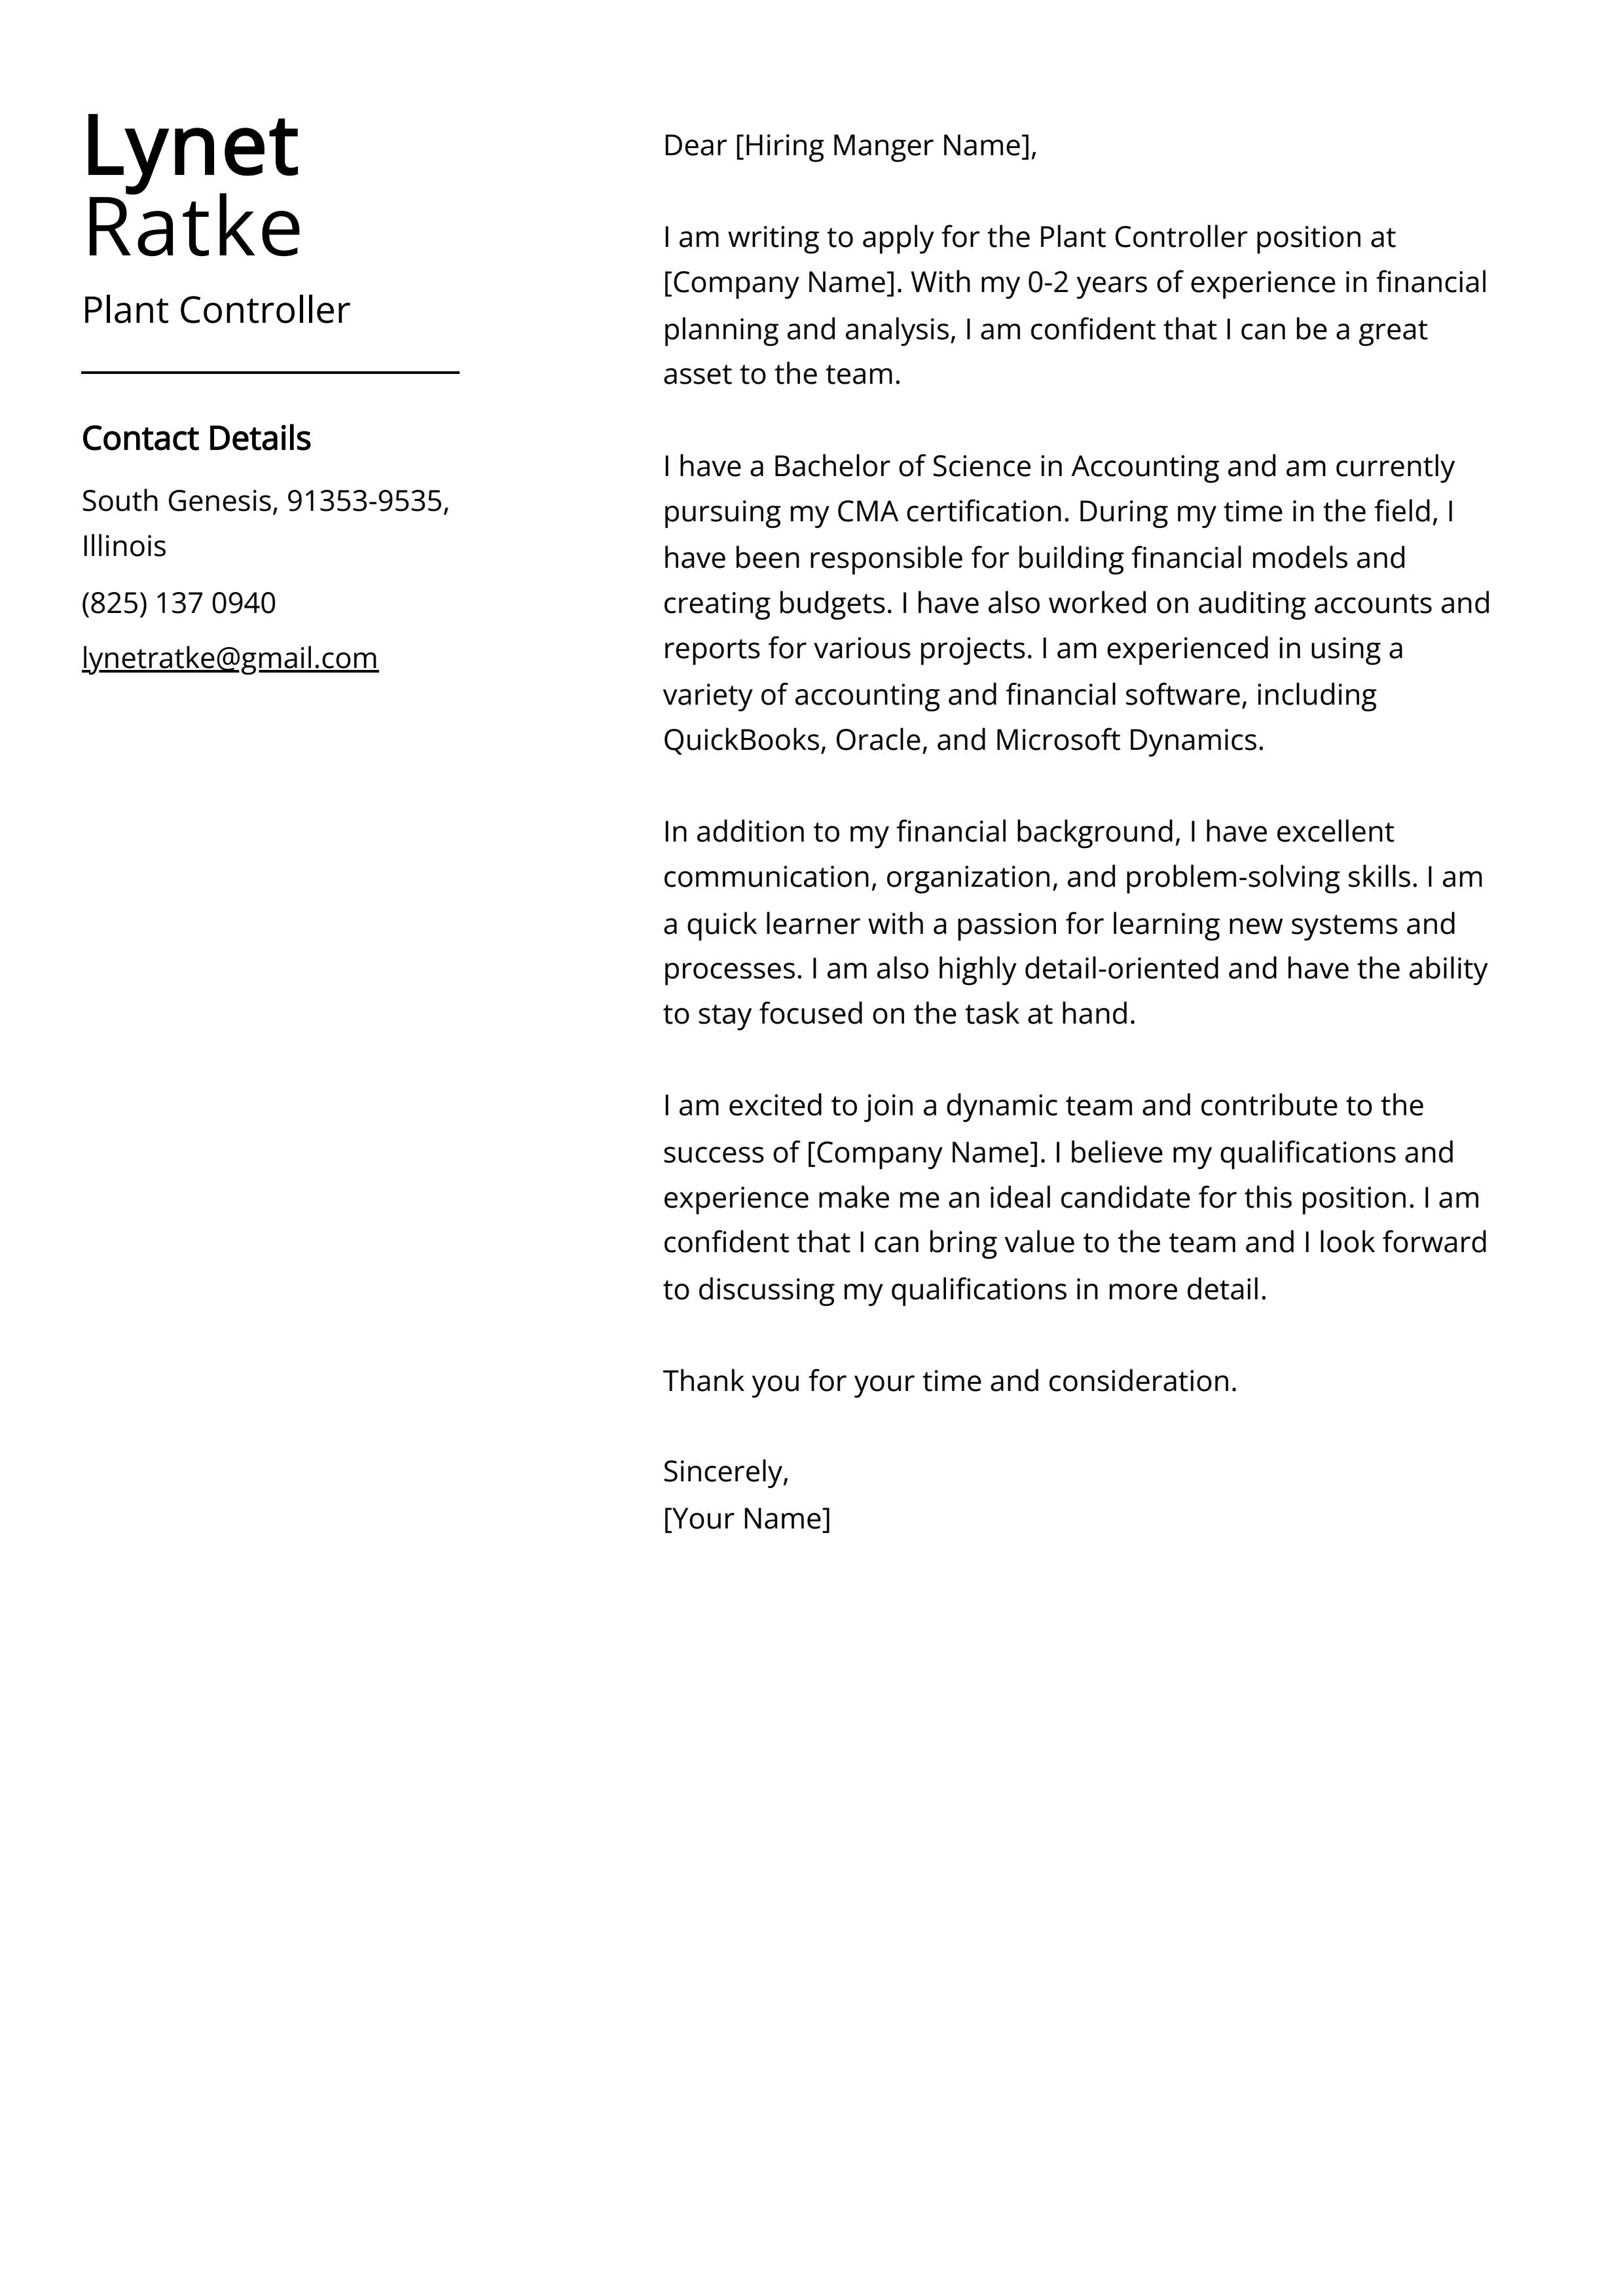 Plant Controller Cover Letter Example